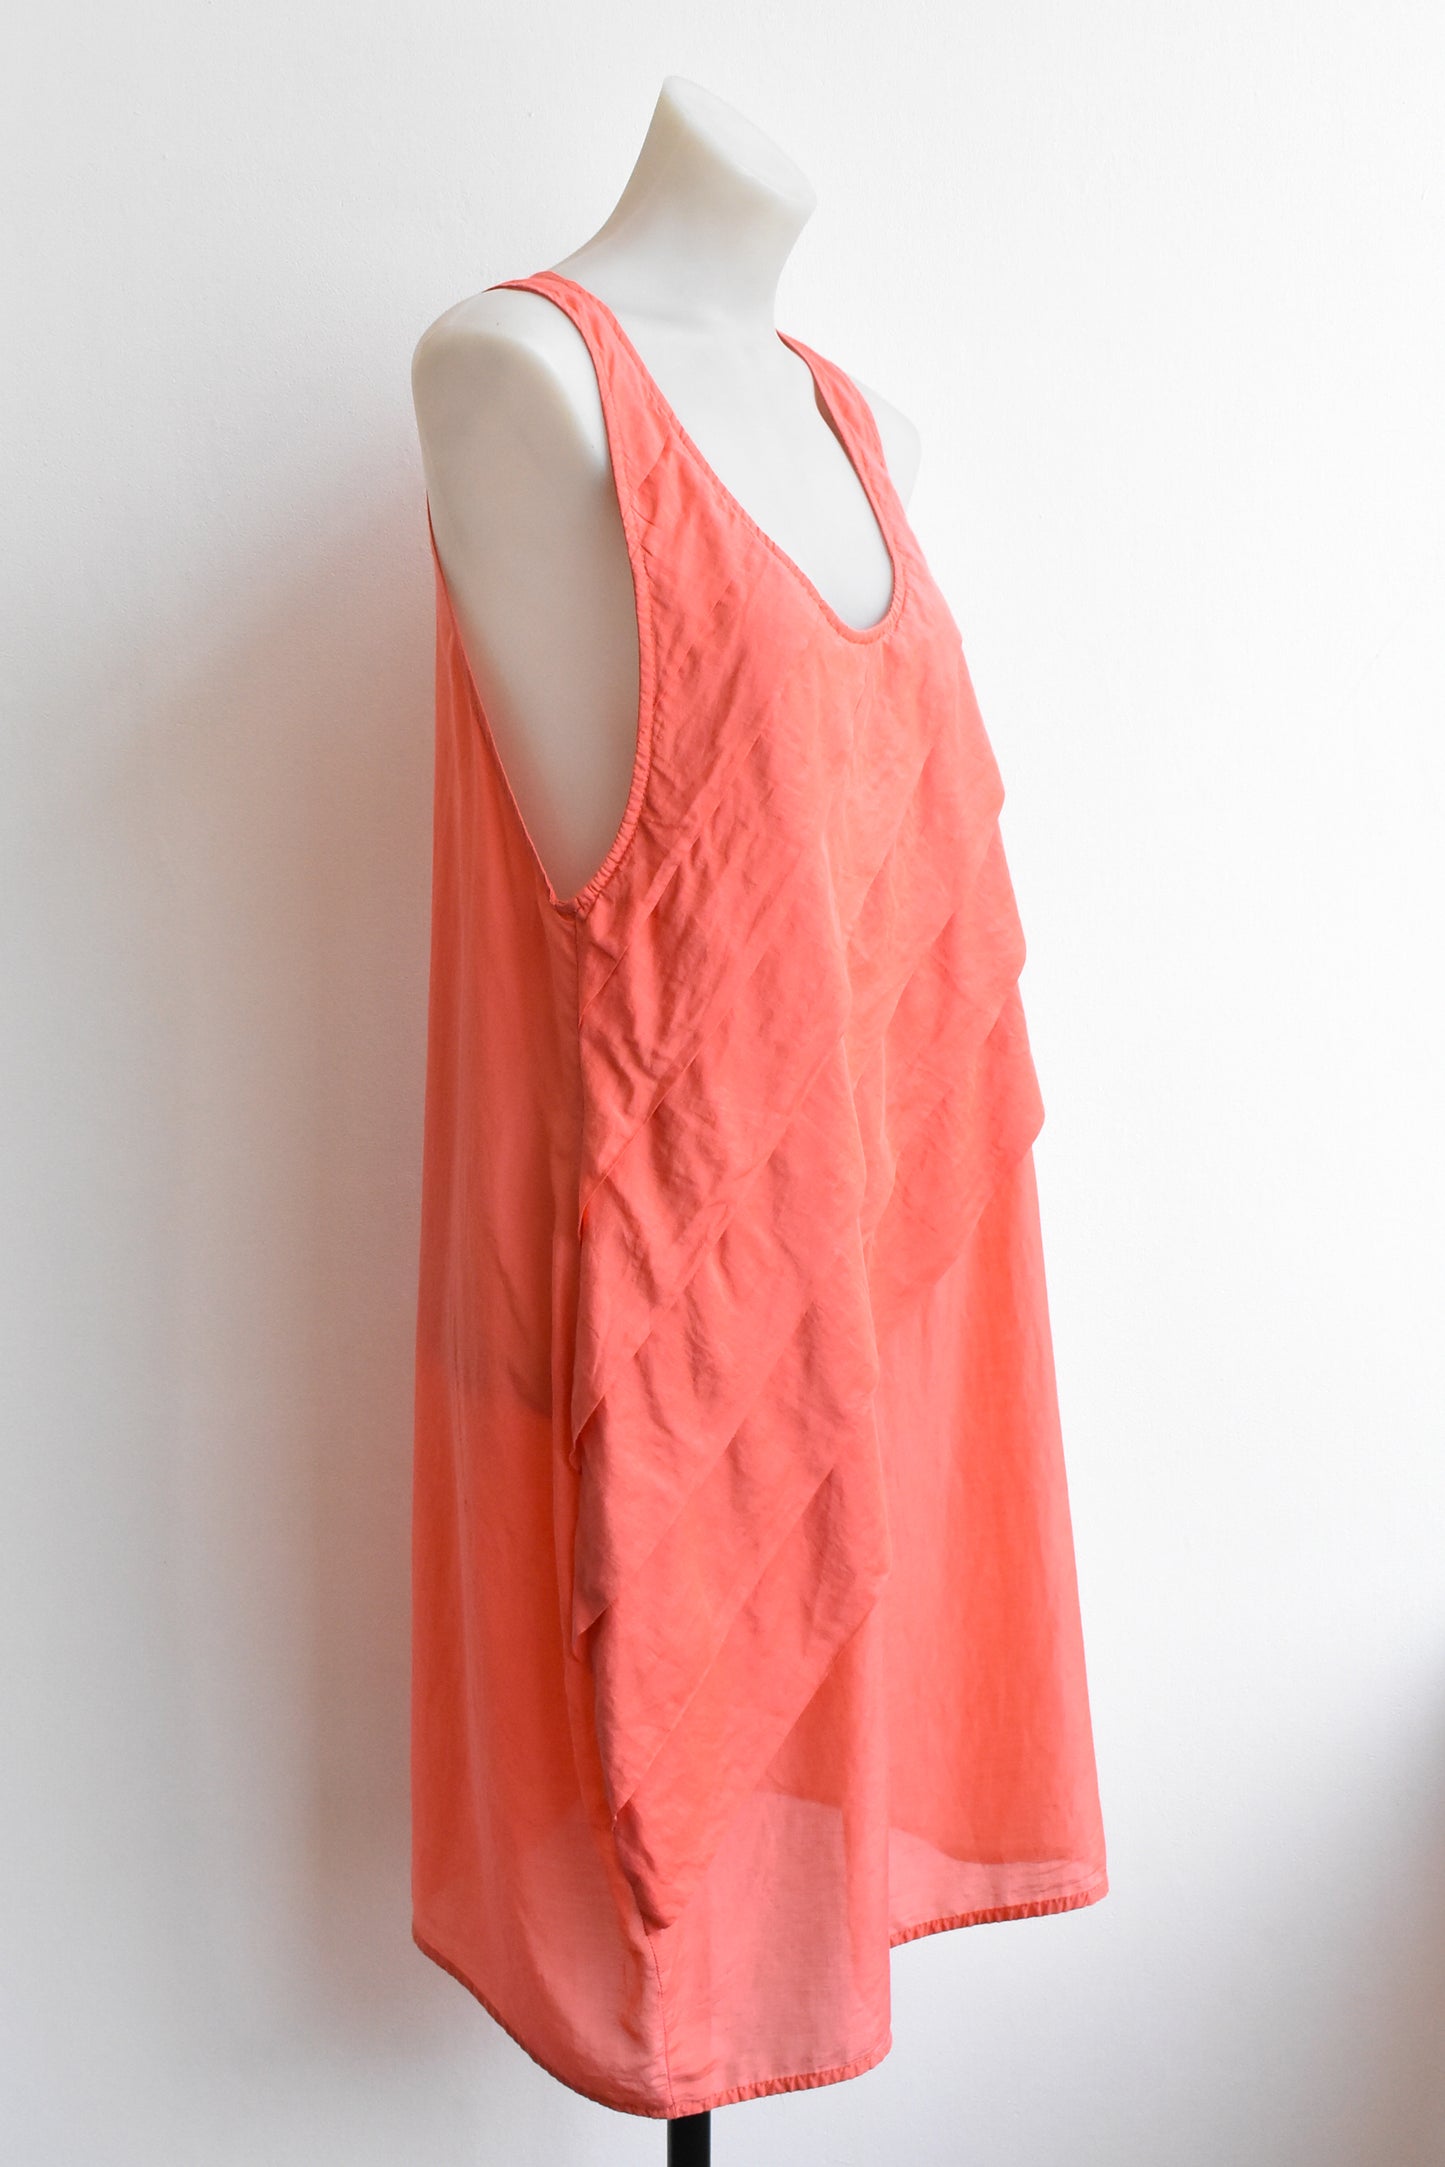 Hopetown coral silk sleeveless dress with front paneling. M